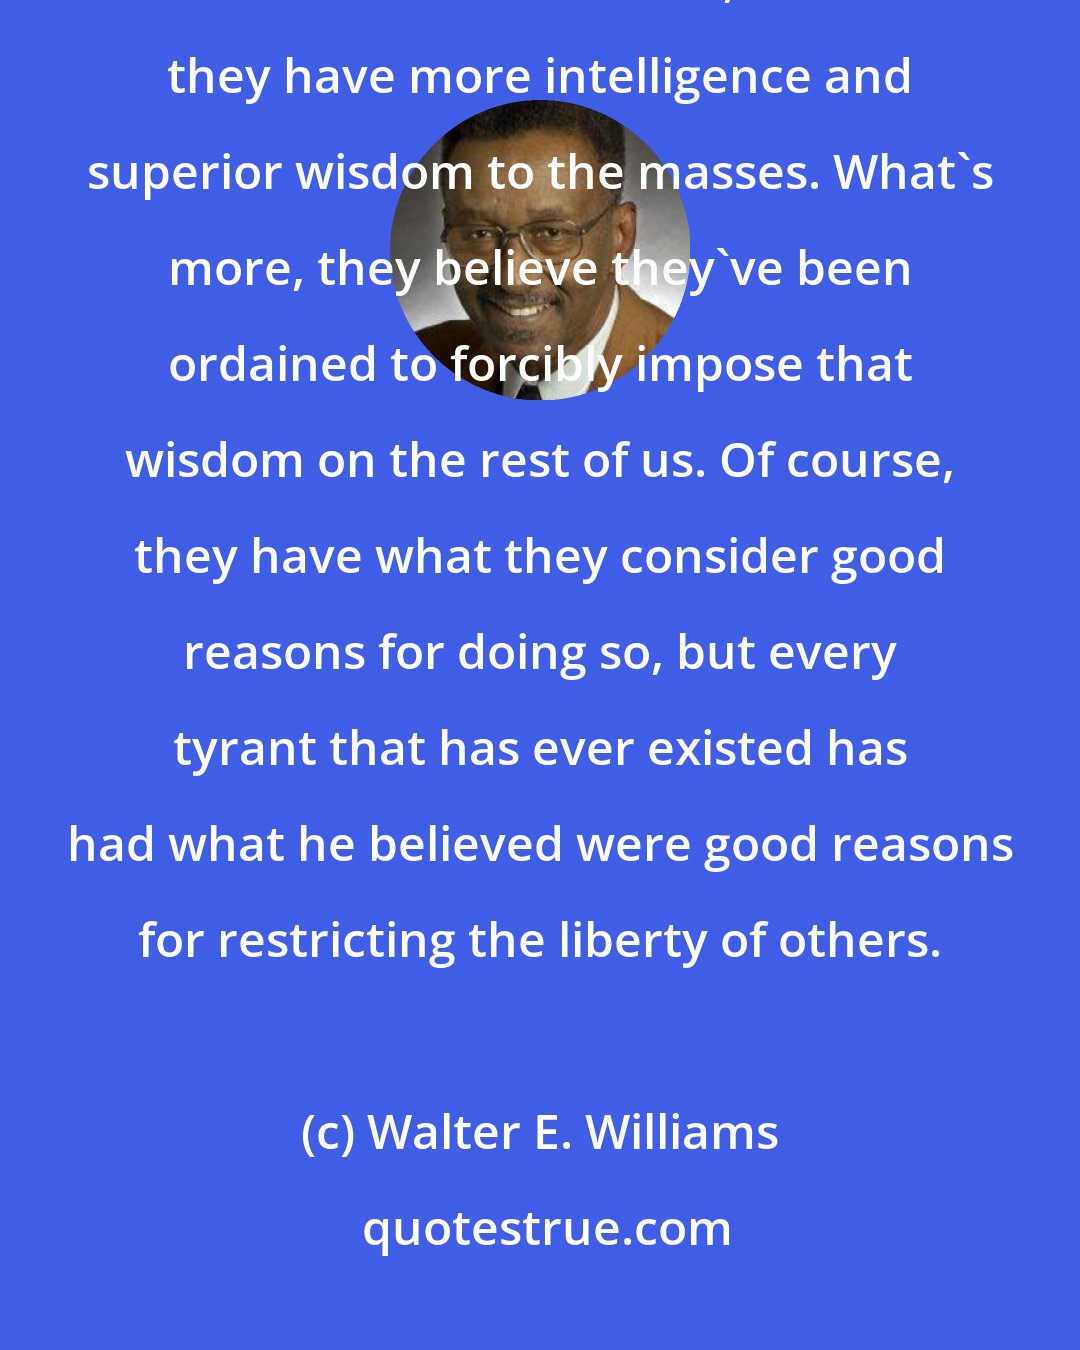 Walter E. Williams: People who denounce the free market and voluntary exchange, and are for control and coercion, believe they have more intelligence and superior wisdom to the masses. What's more, they believe they've been ordained to forcibly impose that wisdom on the rest of us. Of course, they have what they consider good reasons for doing so, but every tyrant that has ever existed has had what he believed were good reasons for restricting the liberty of others.